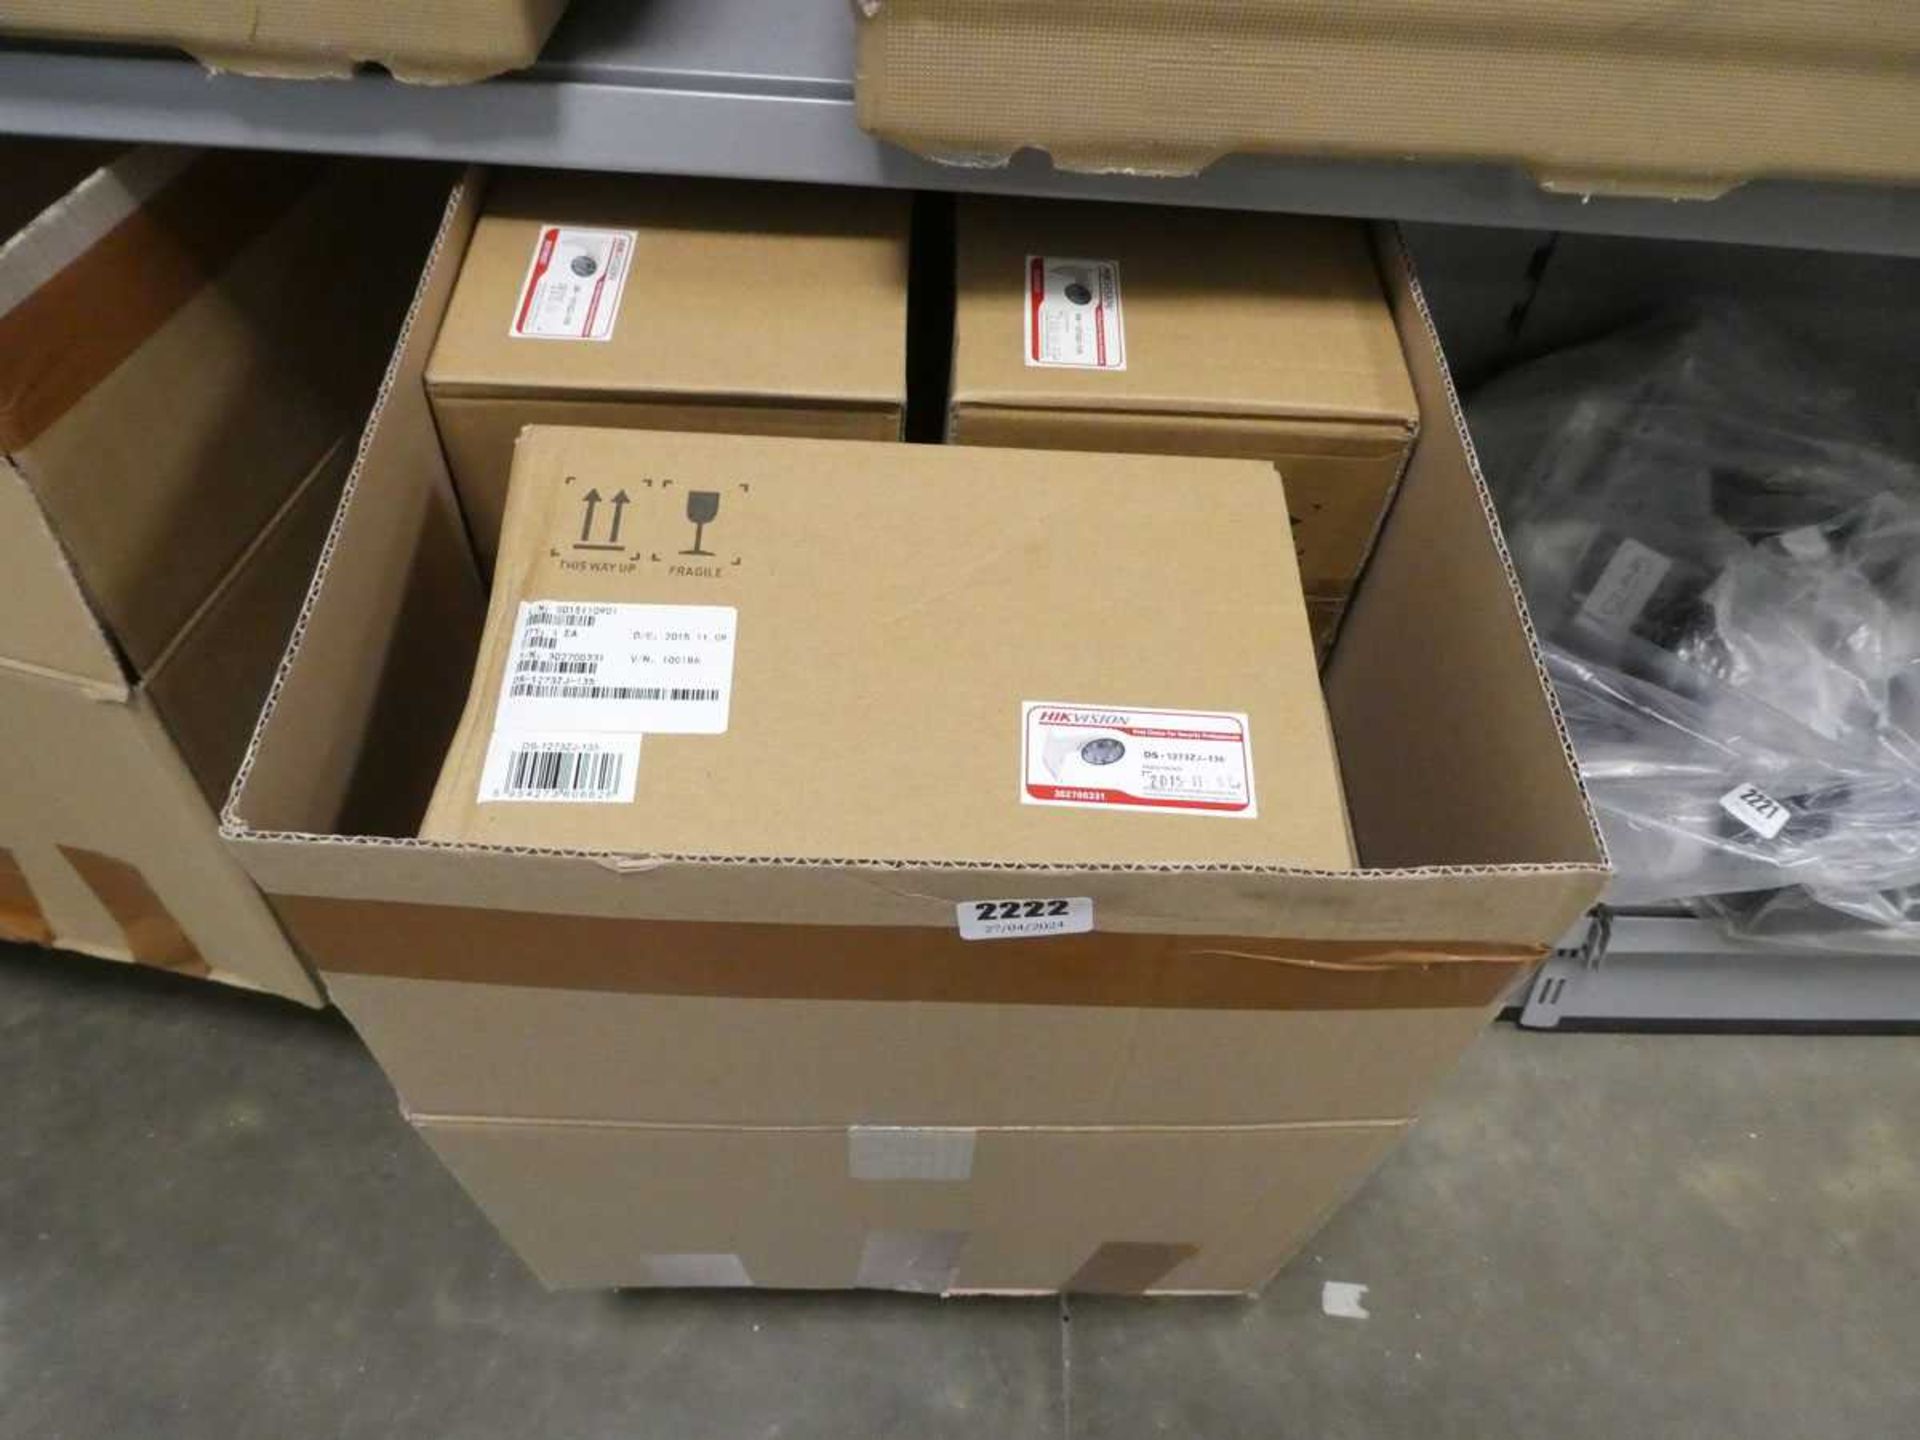 2 boxes containing Hik vision security lights